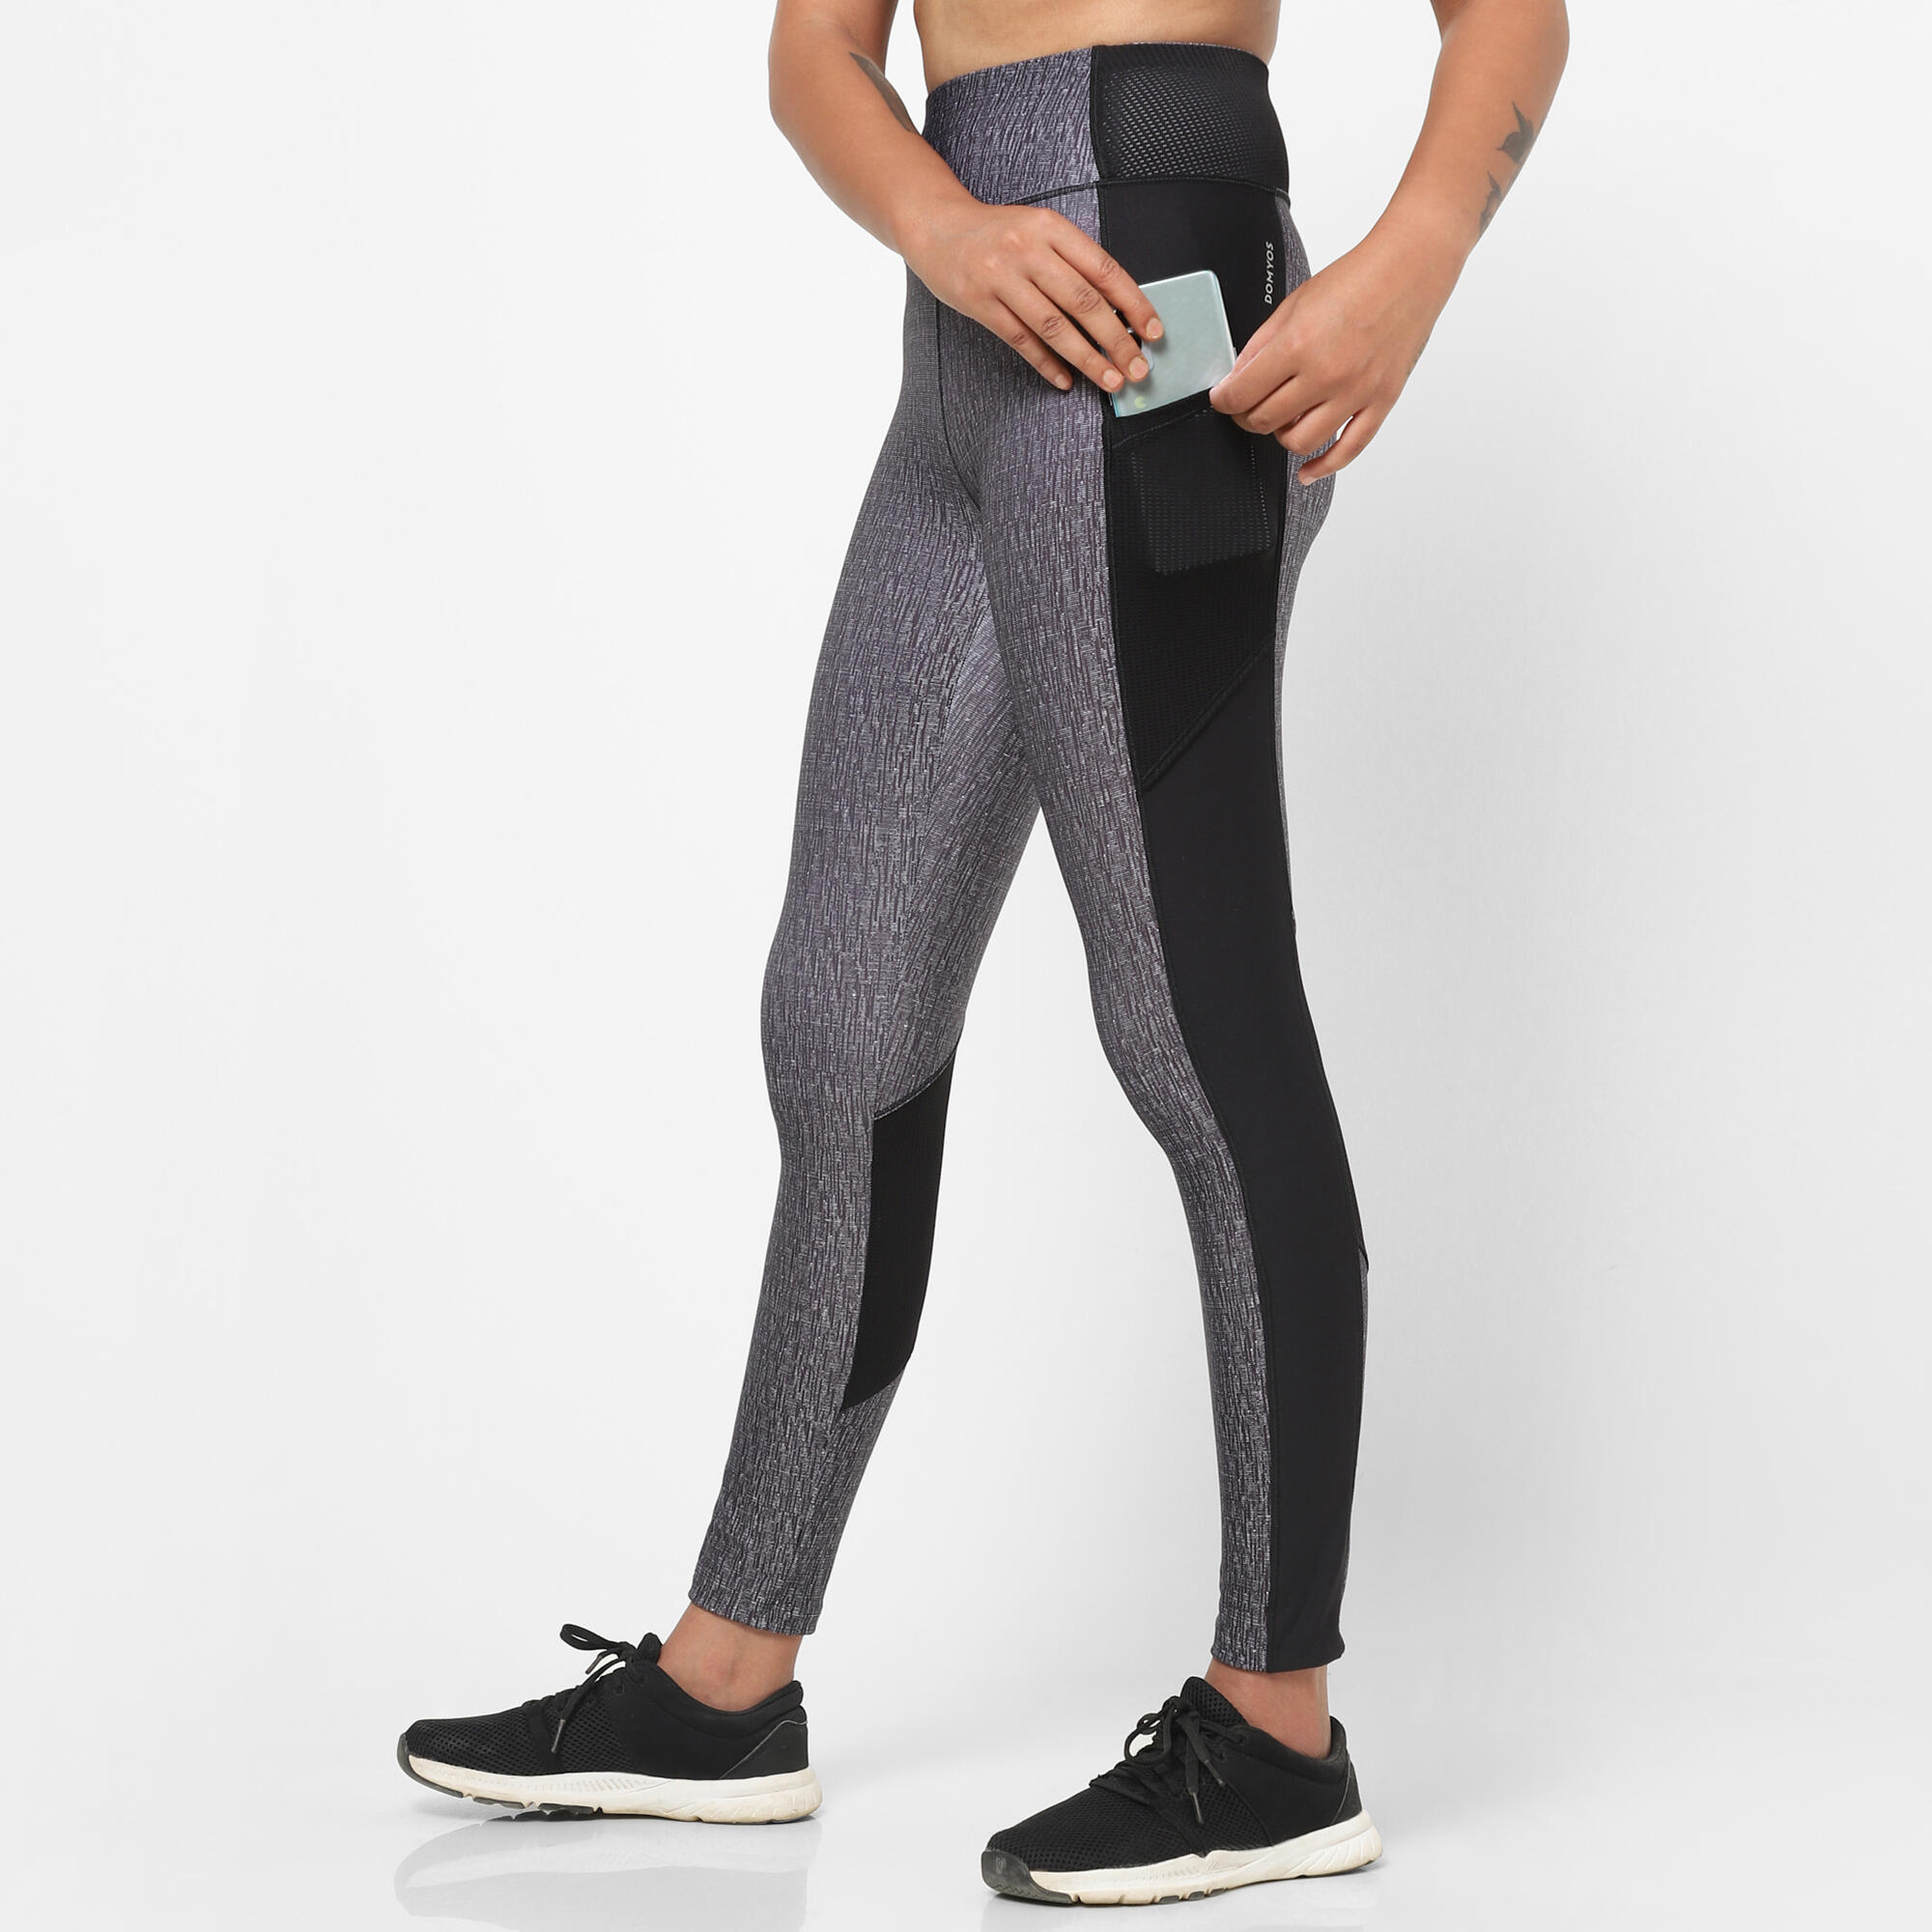 Danna Gym Tights with Phone Pockets and Mesh Panels on the Calf